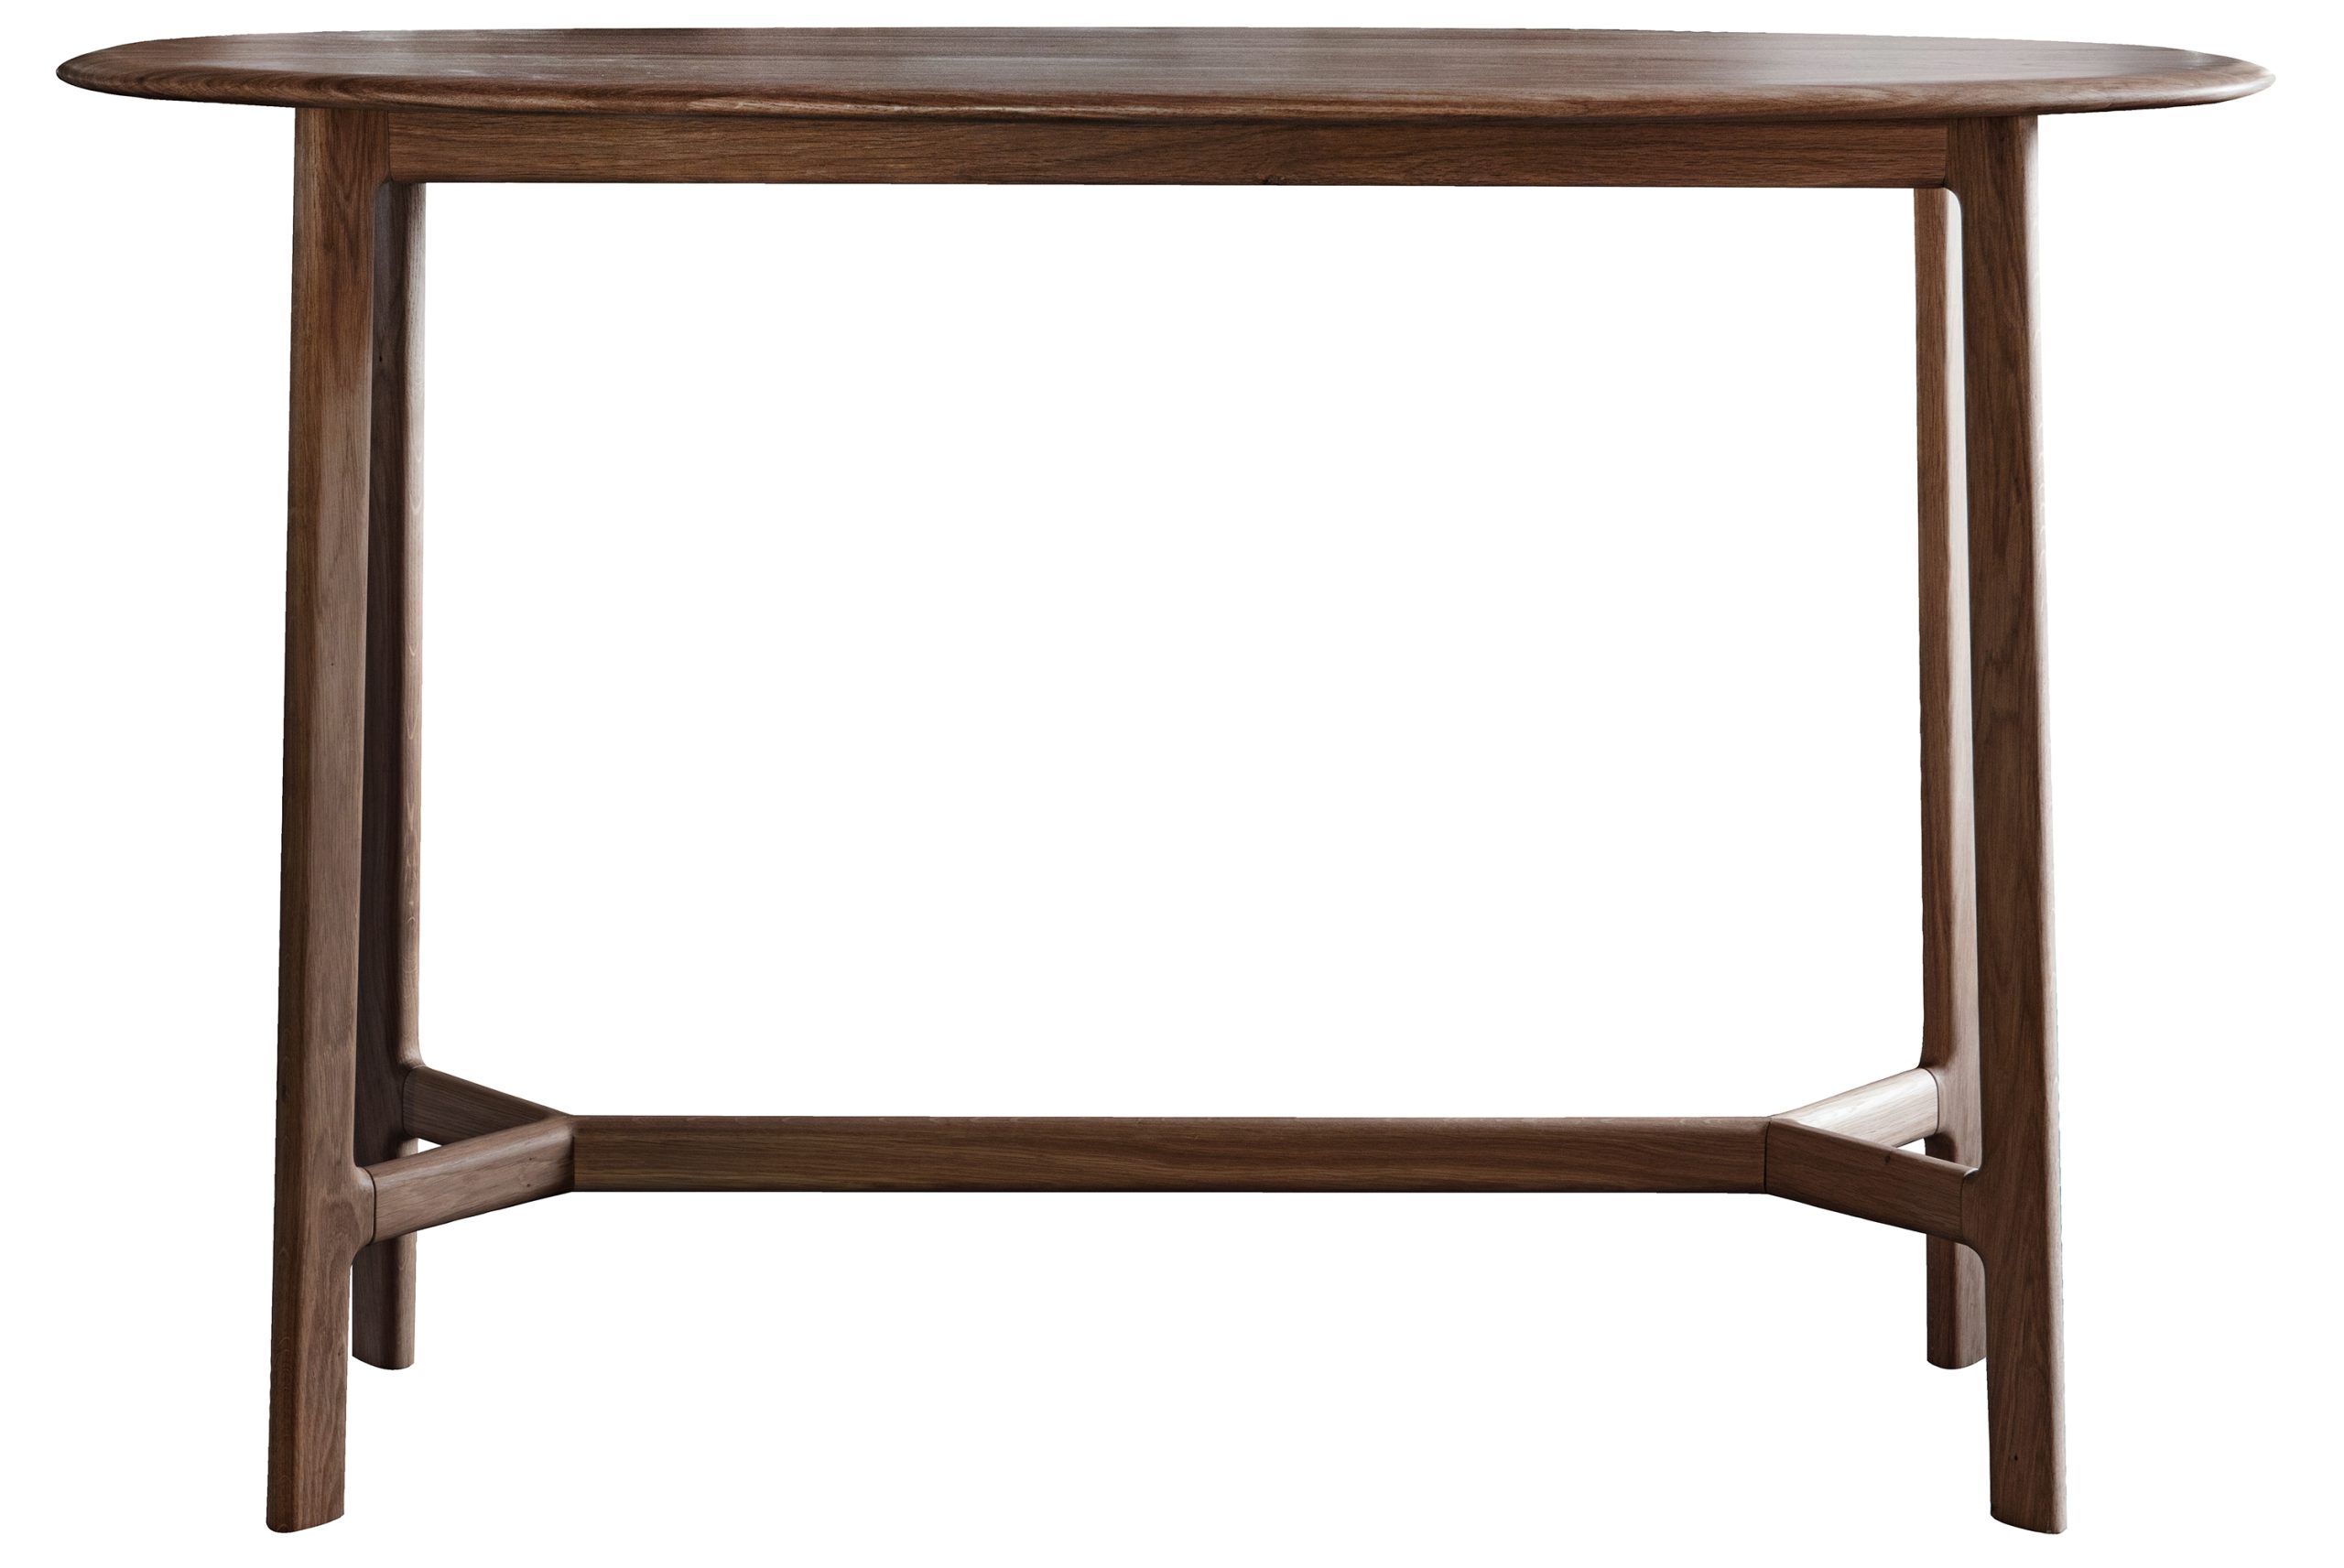 Gallery Direct Madrid Console Table Walnut